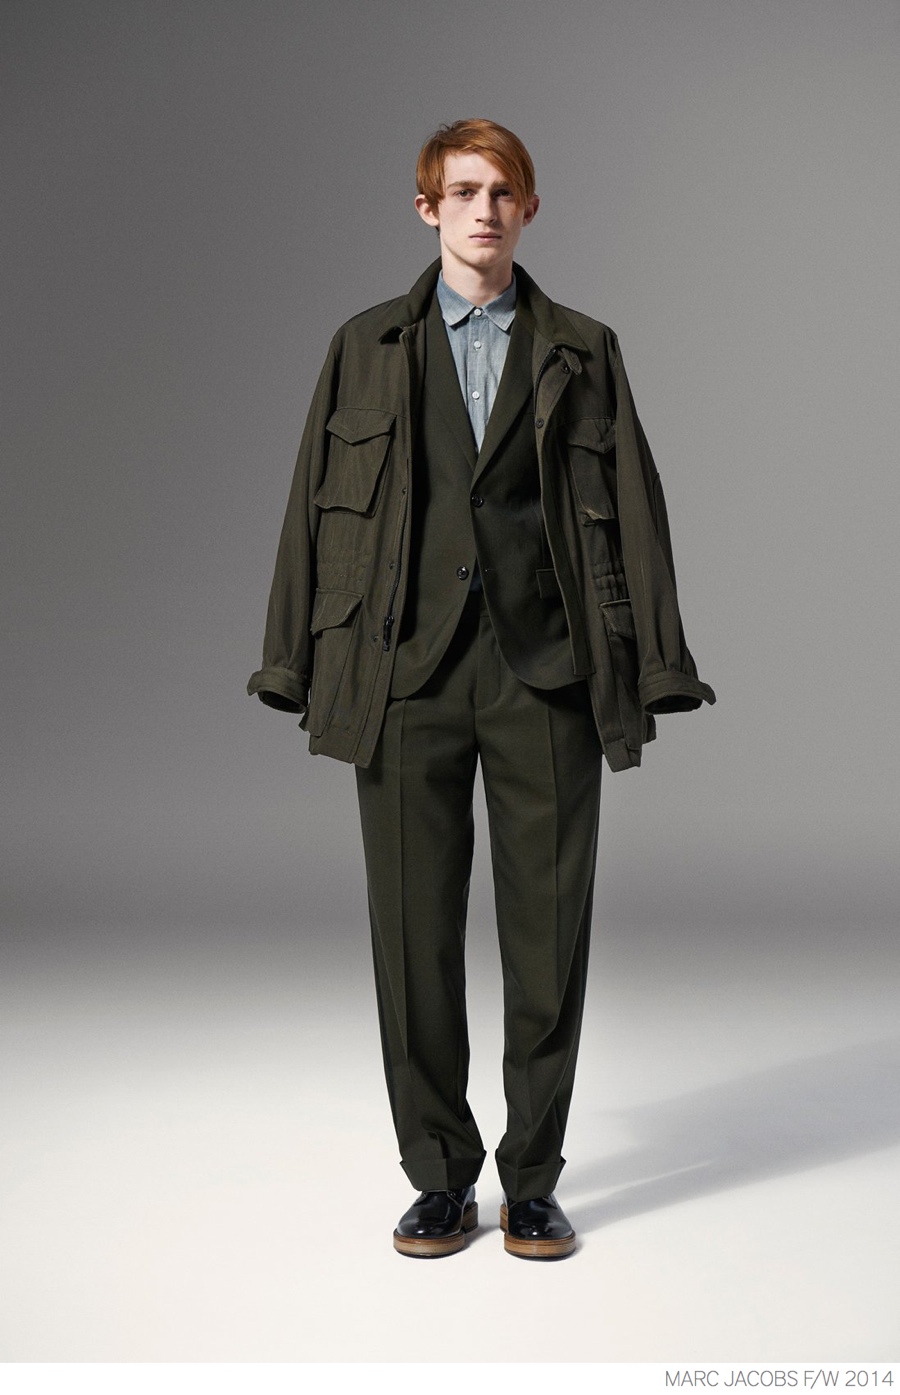 Marc Jacobs Fall Winter 2014 Collection Look Book Formal Suiting 002